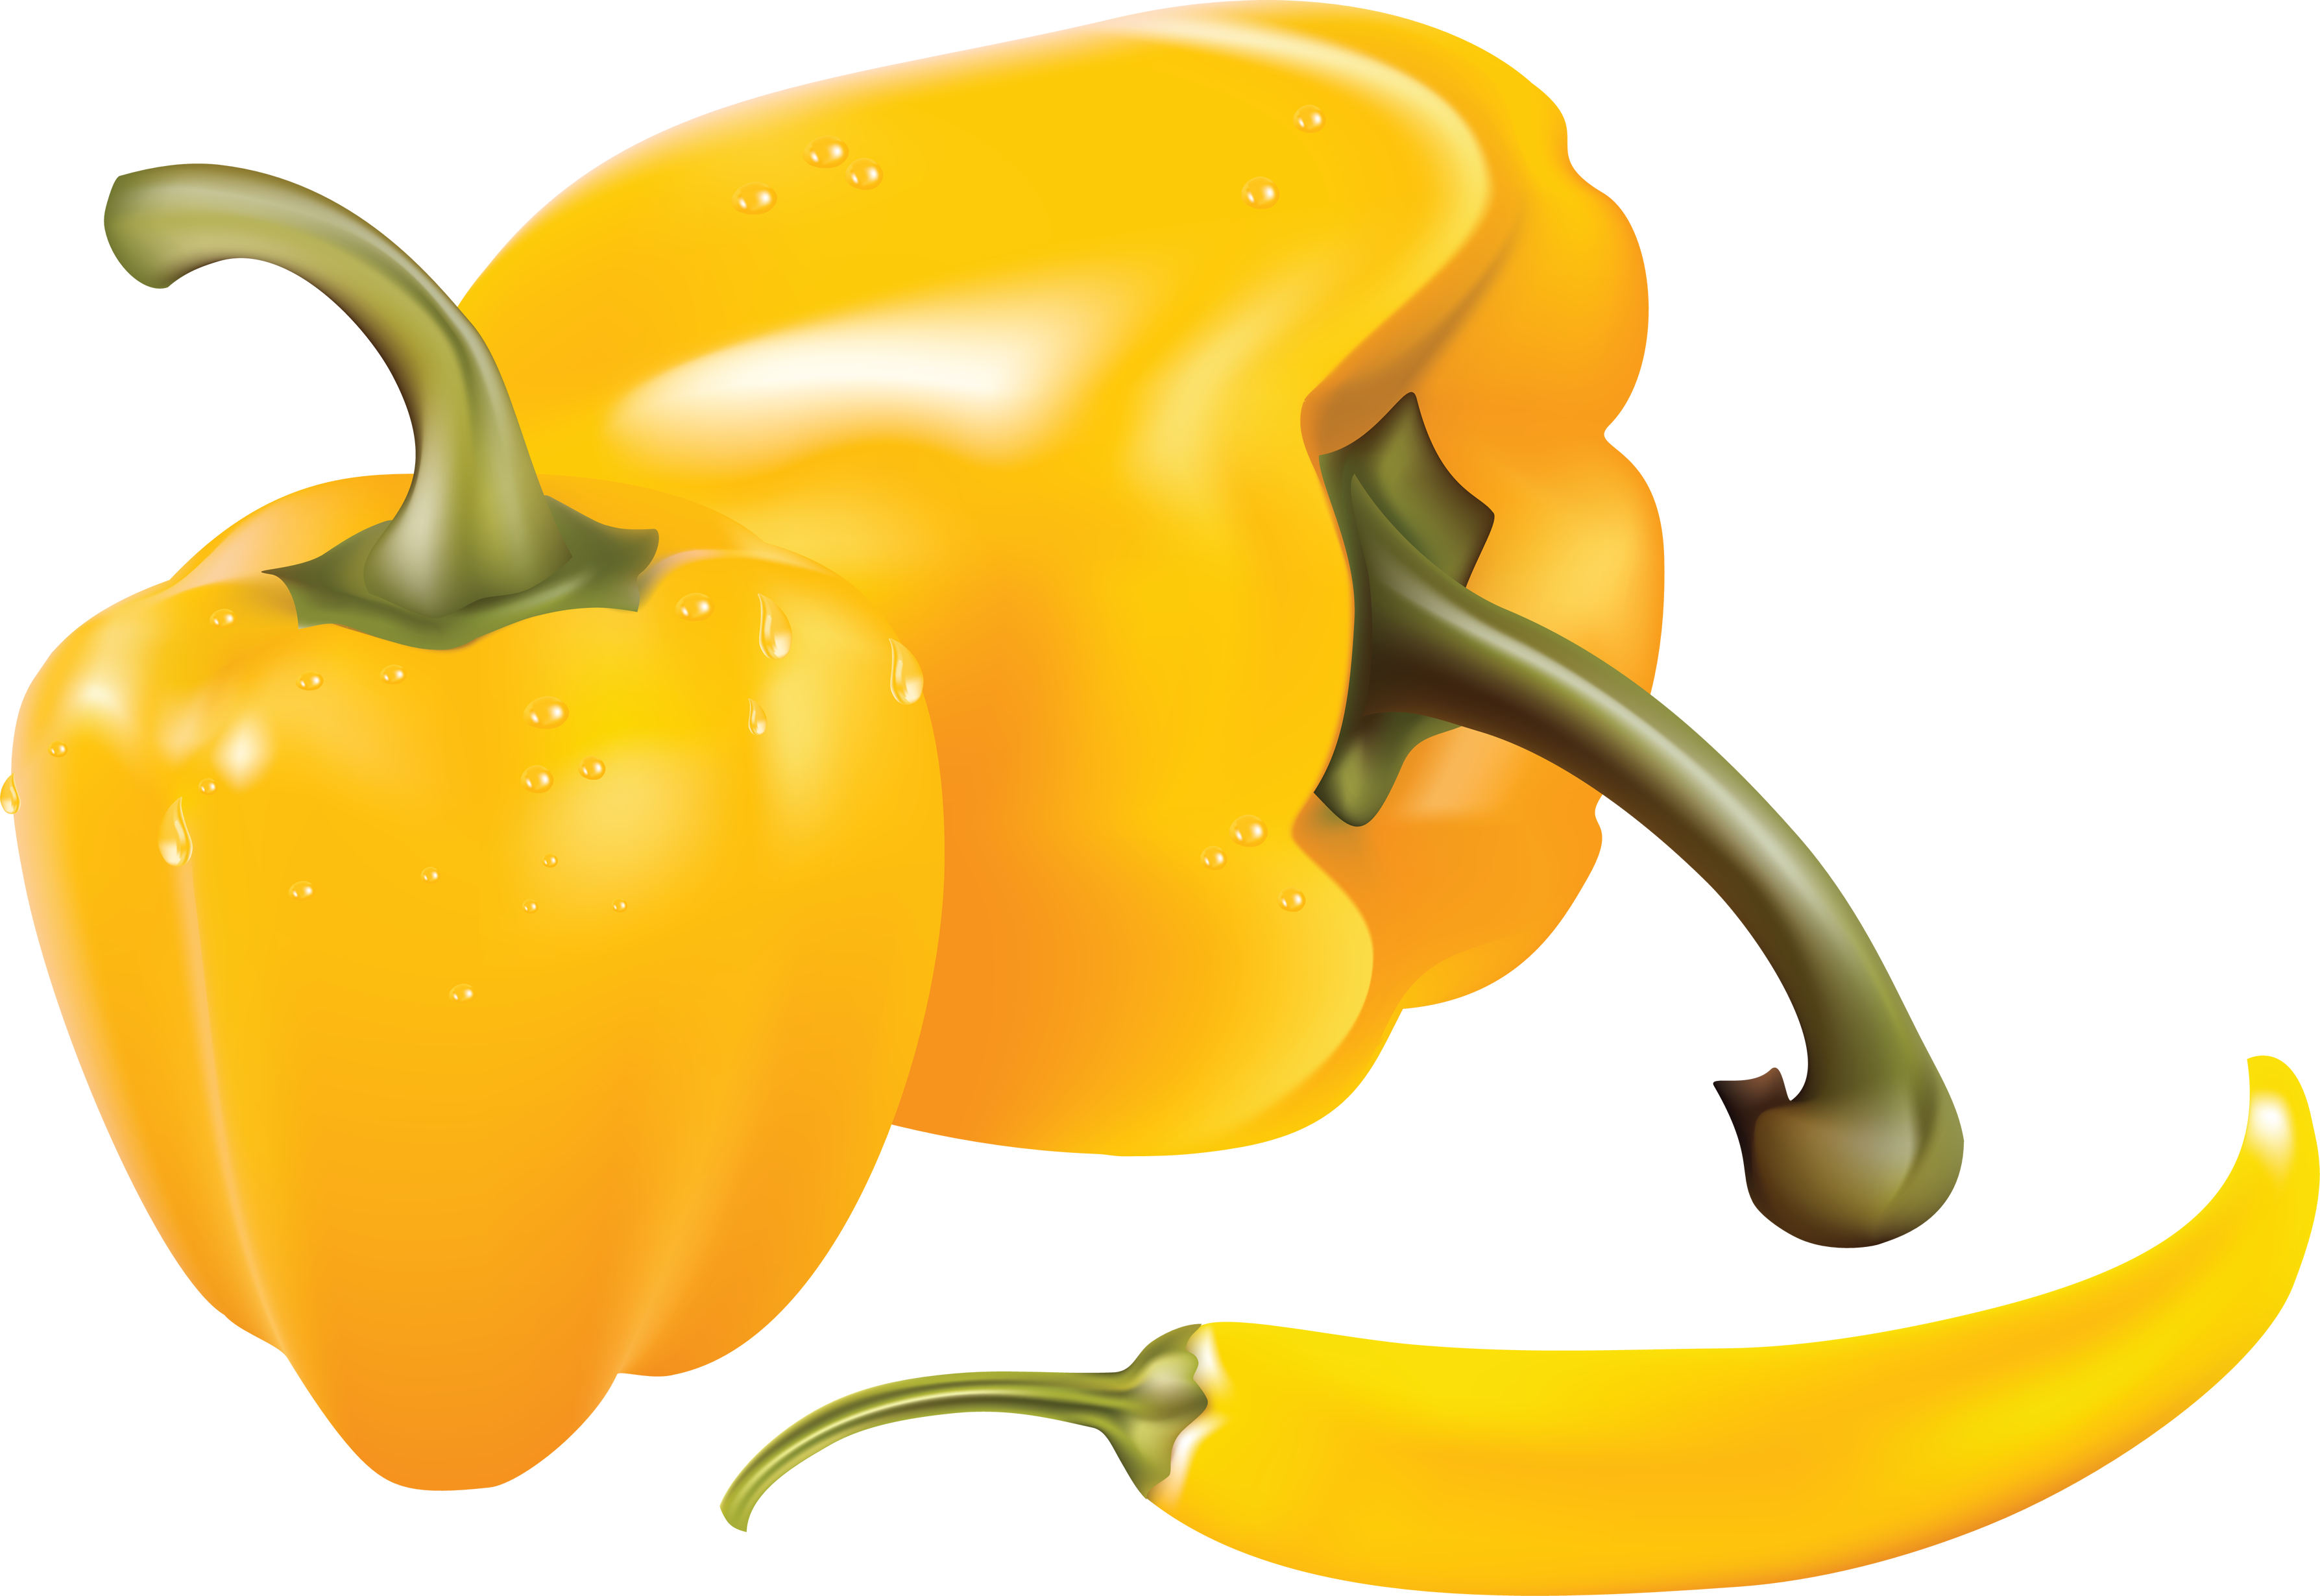 Peppers clipart black and white. Pepper png image free